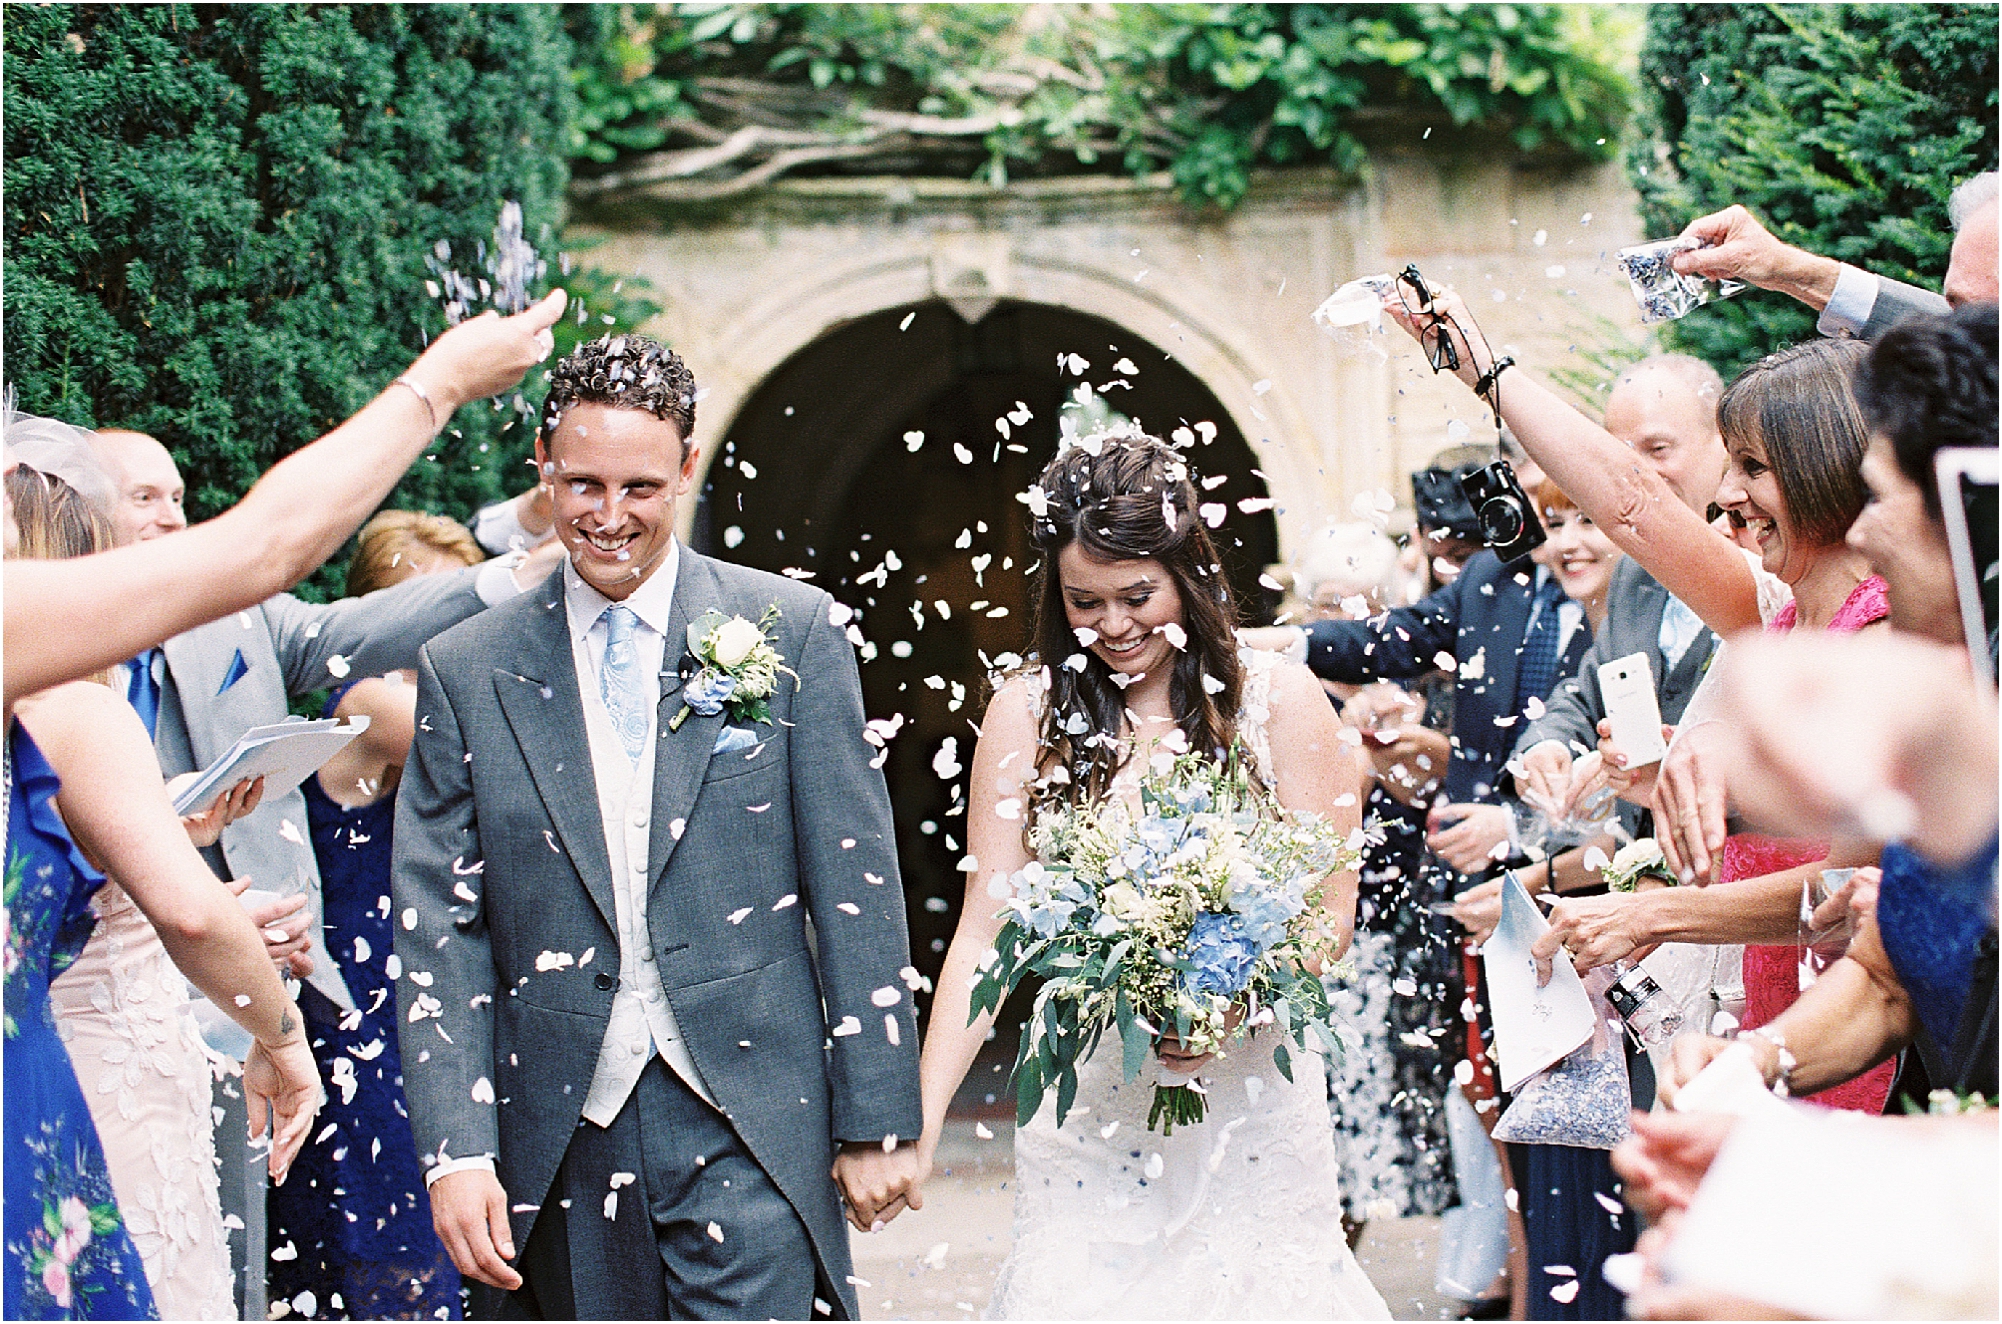 Bride and groom walking through confetti smiling after wedding ceremony photography at Chiddingstone church